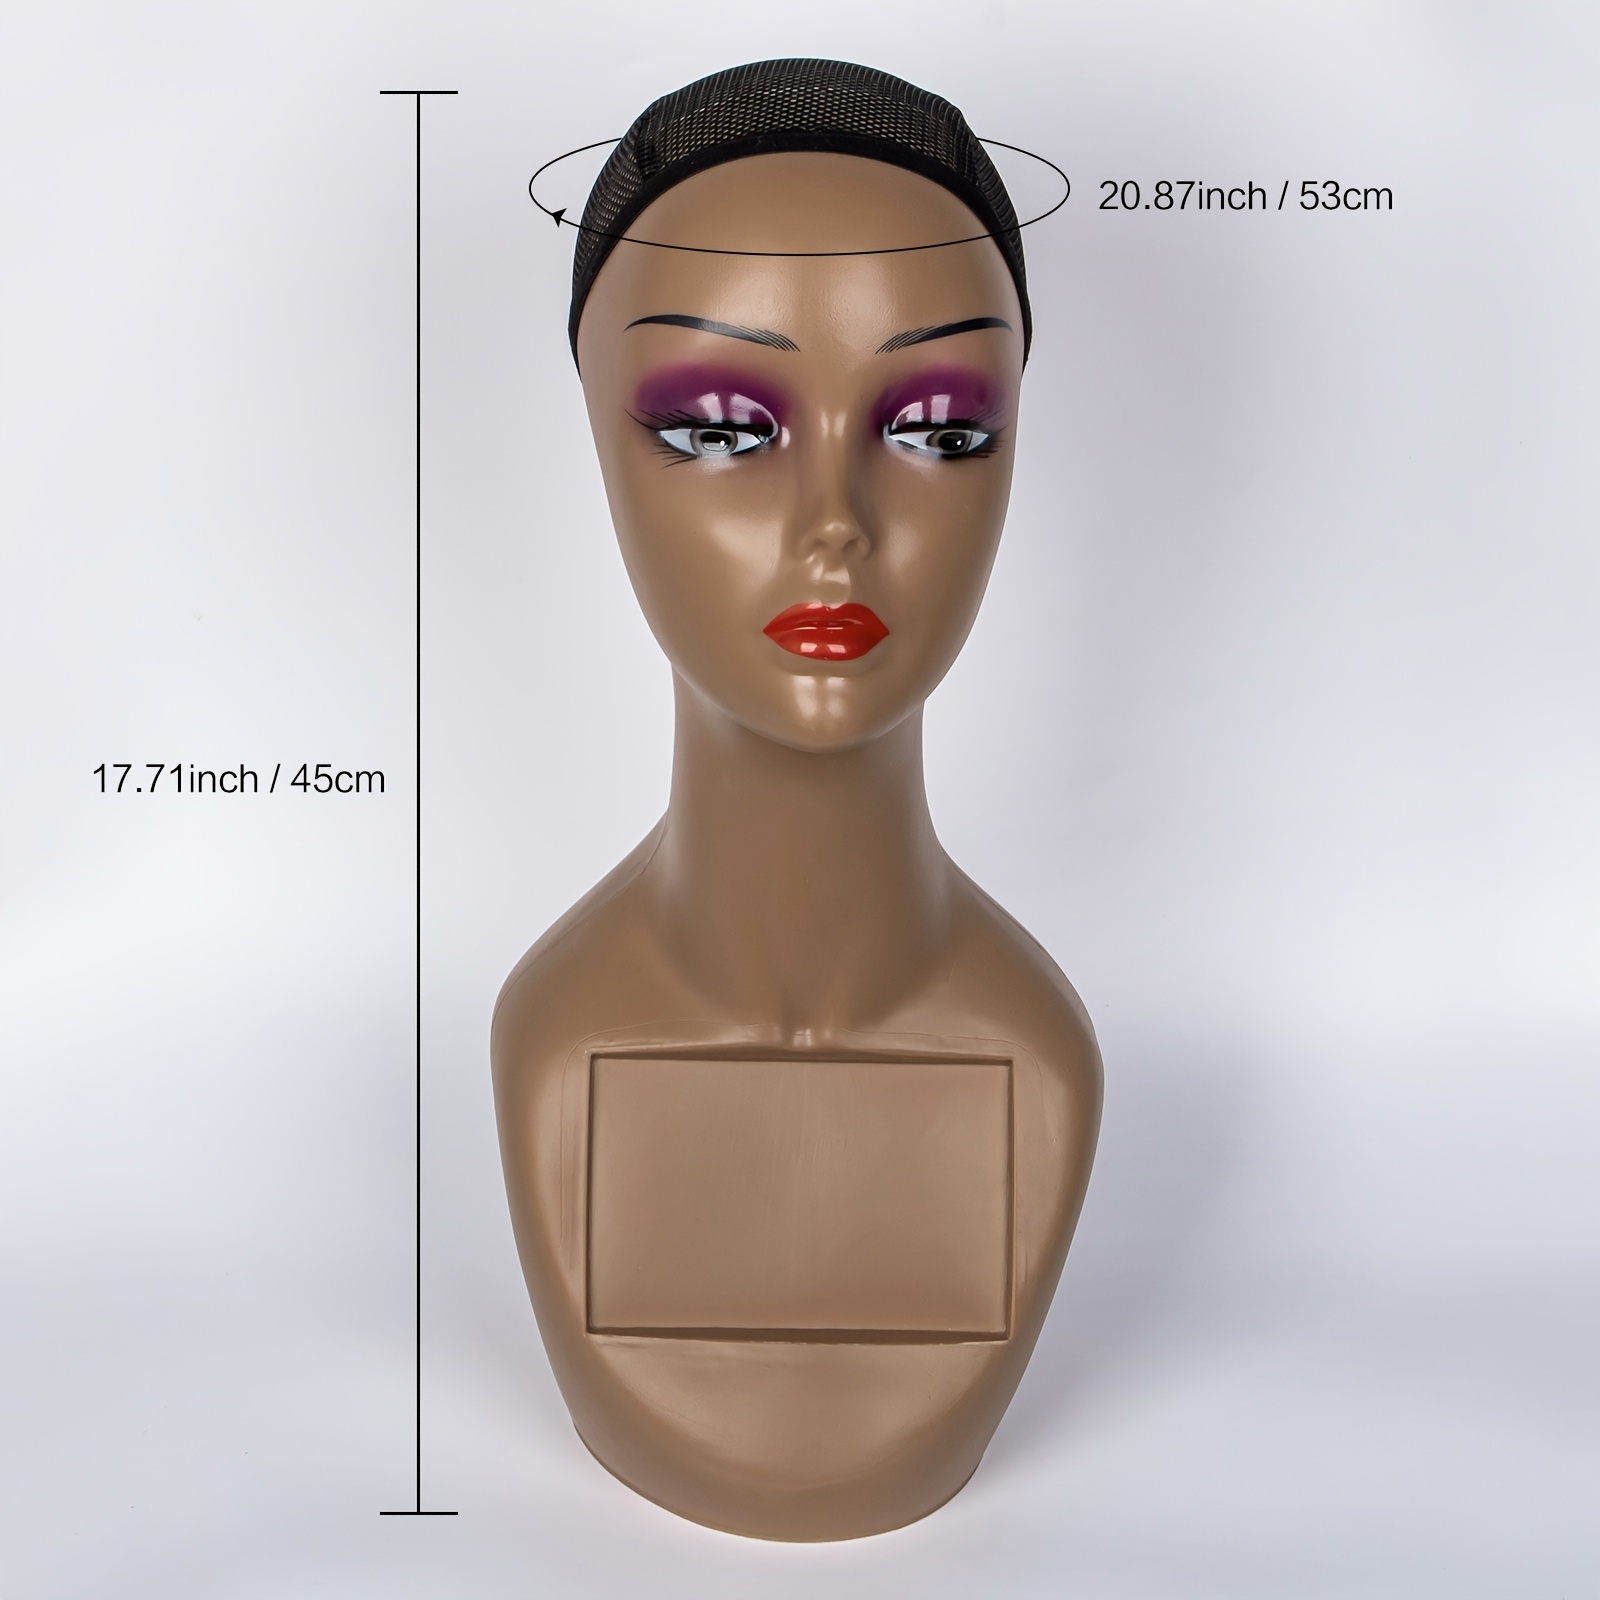 Luxury Female Abstract Mannequin Head Display Hats Wig Scarves